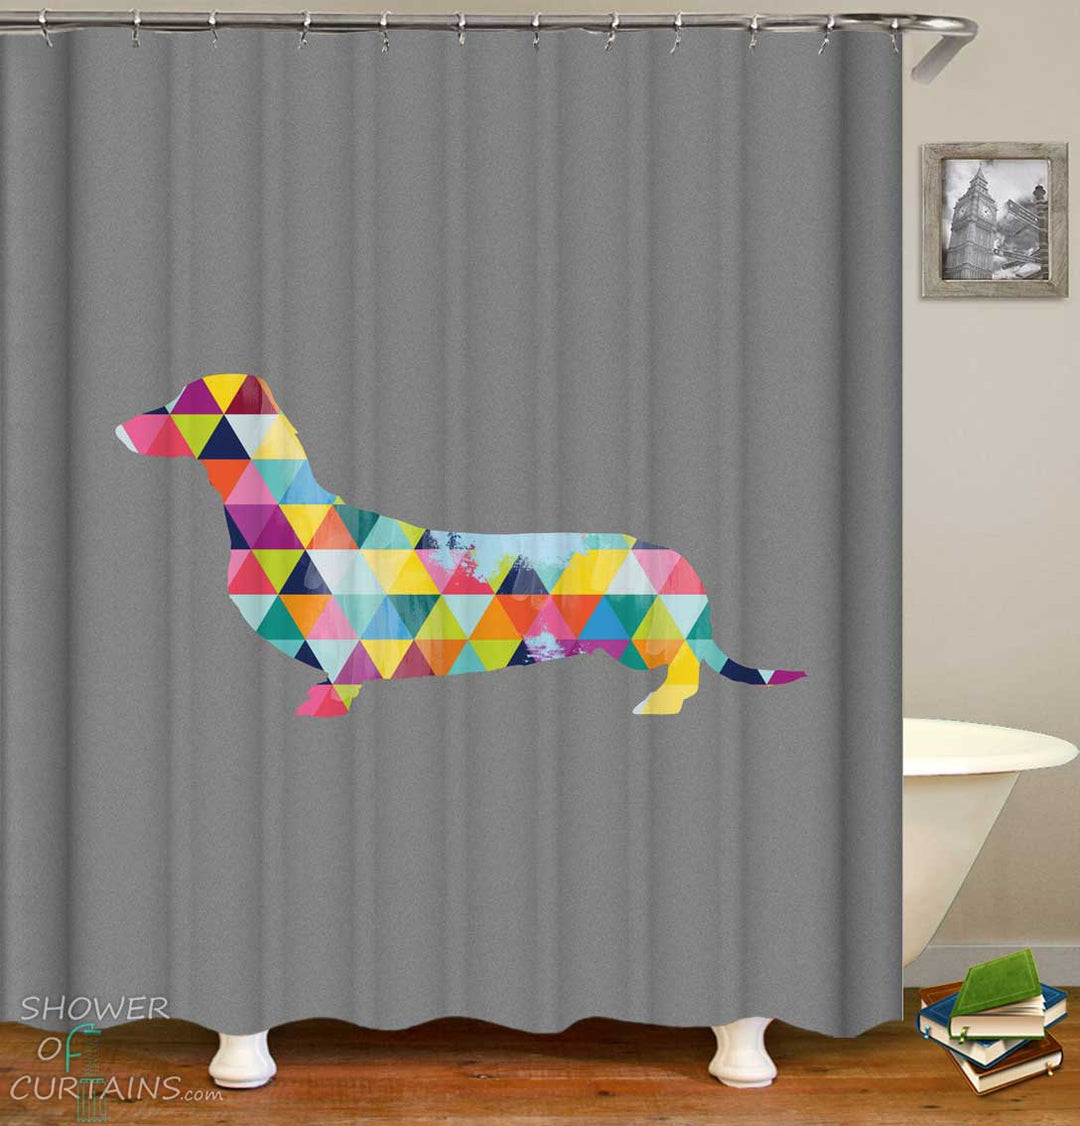 Shower Curtains with Colorful Dachshund Dog